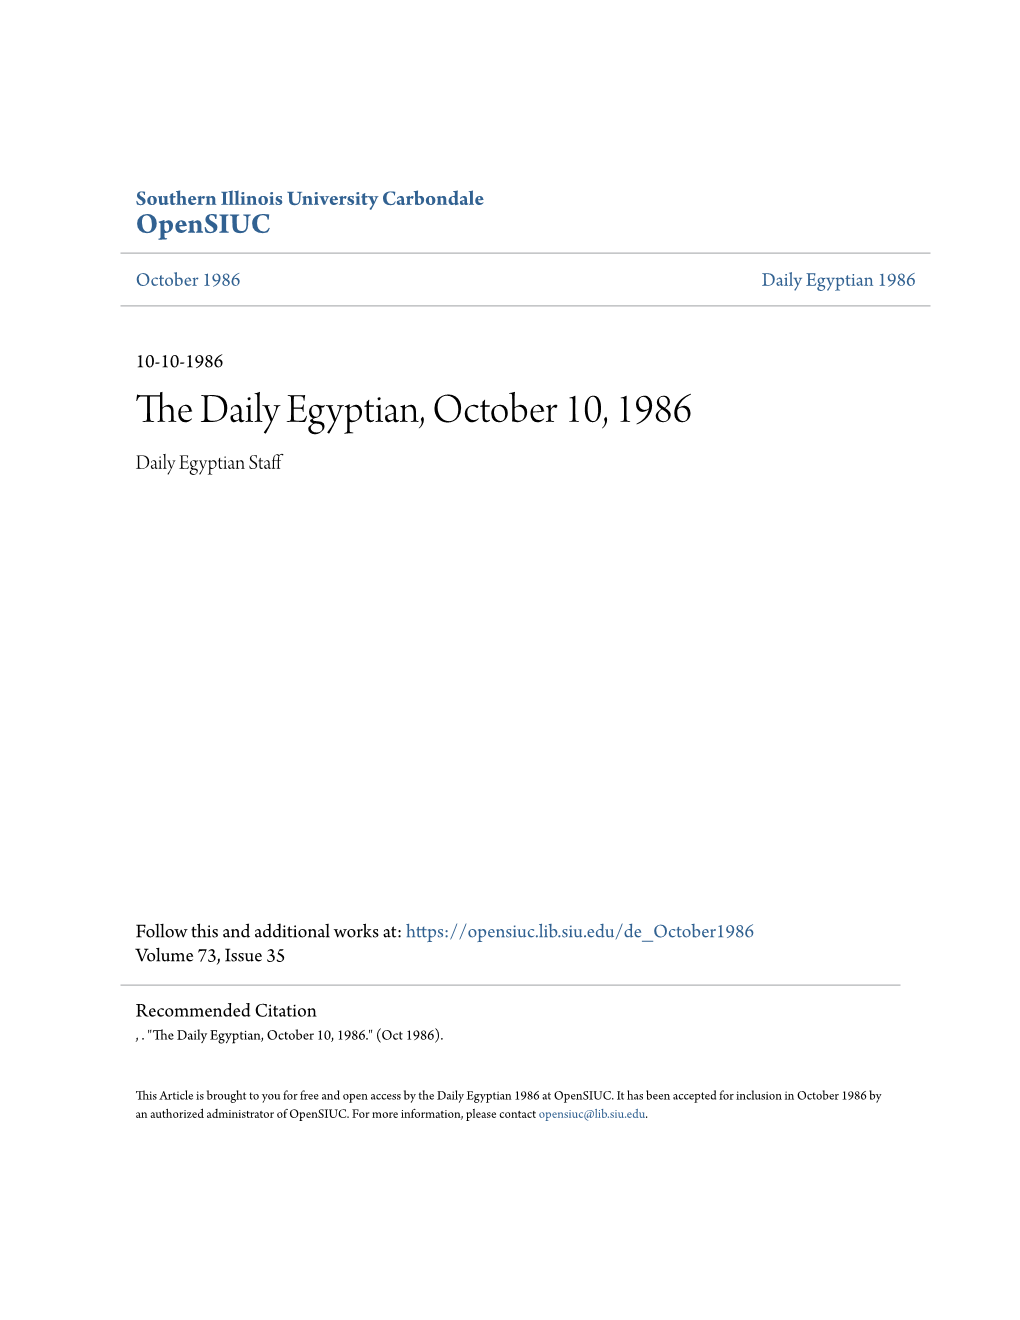 The Daily Egyptian, October 10, 1986